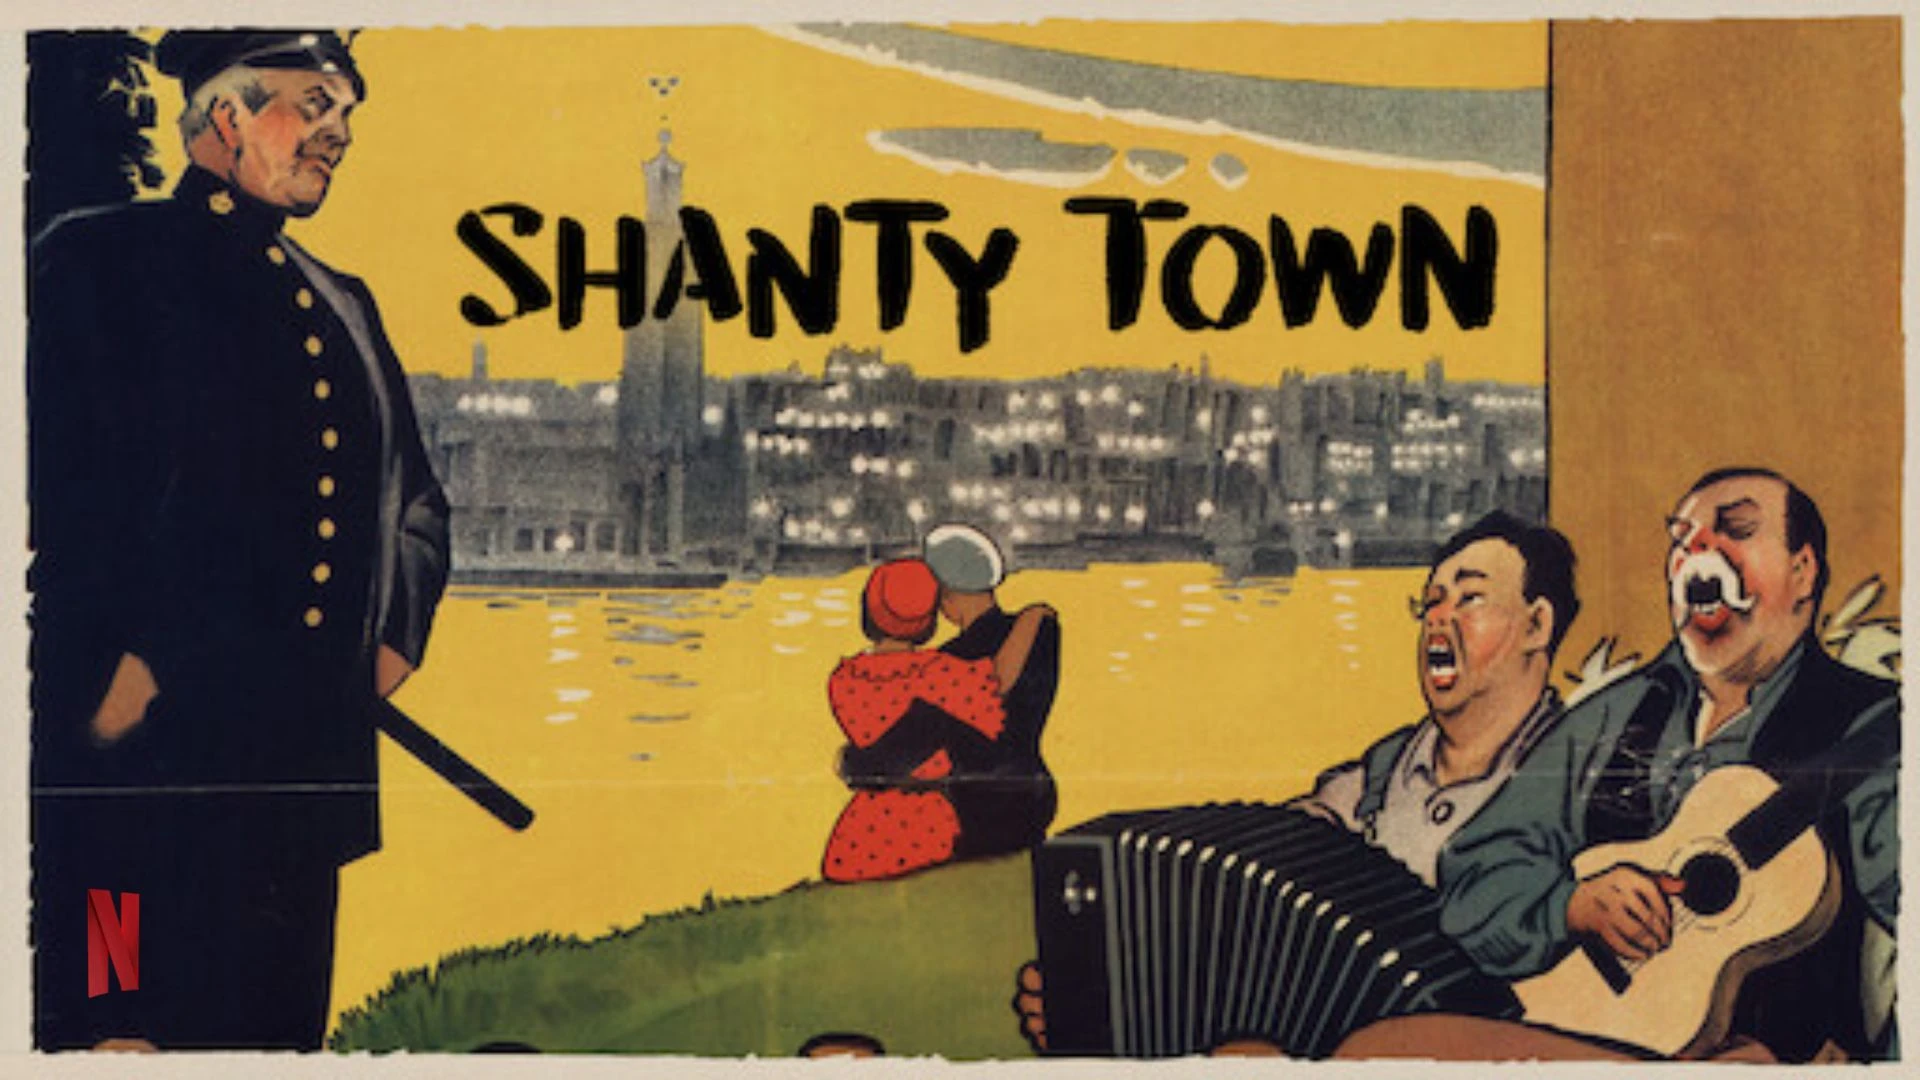 Shanty town Parents Guide